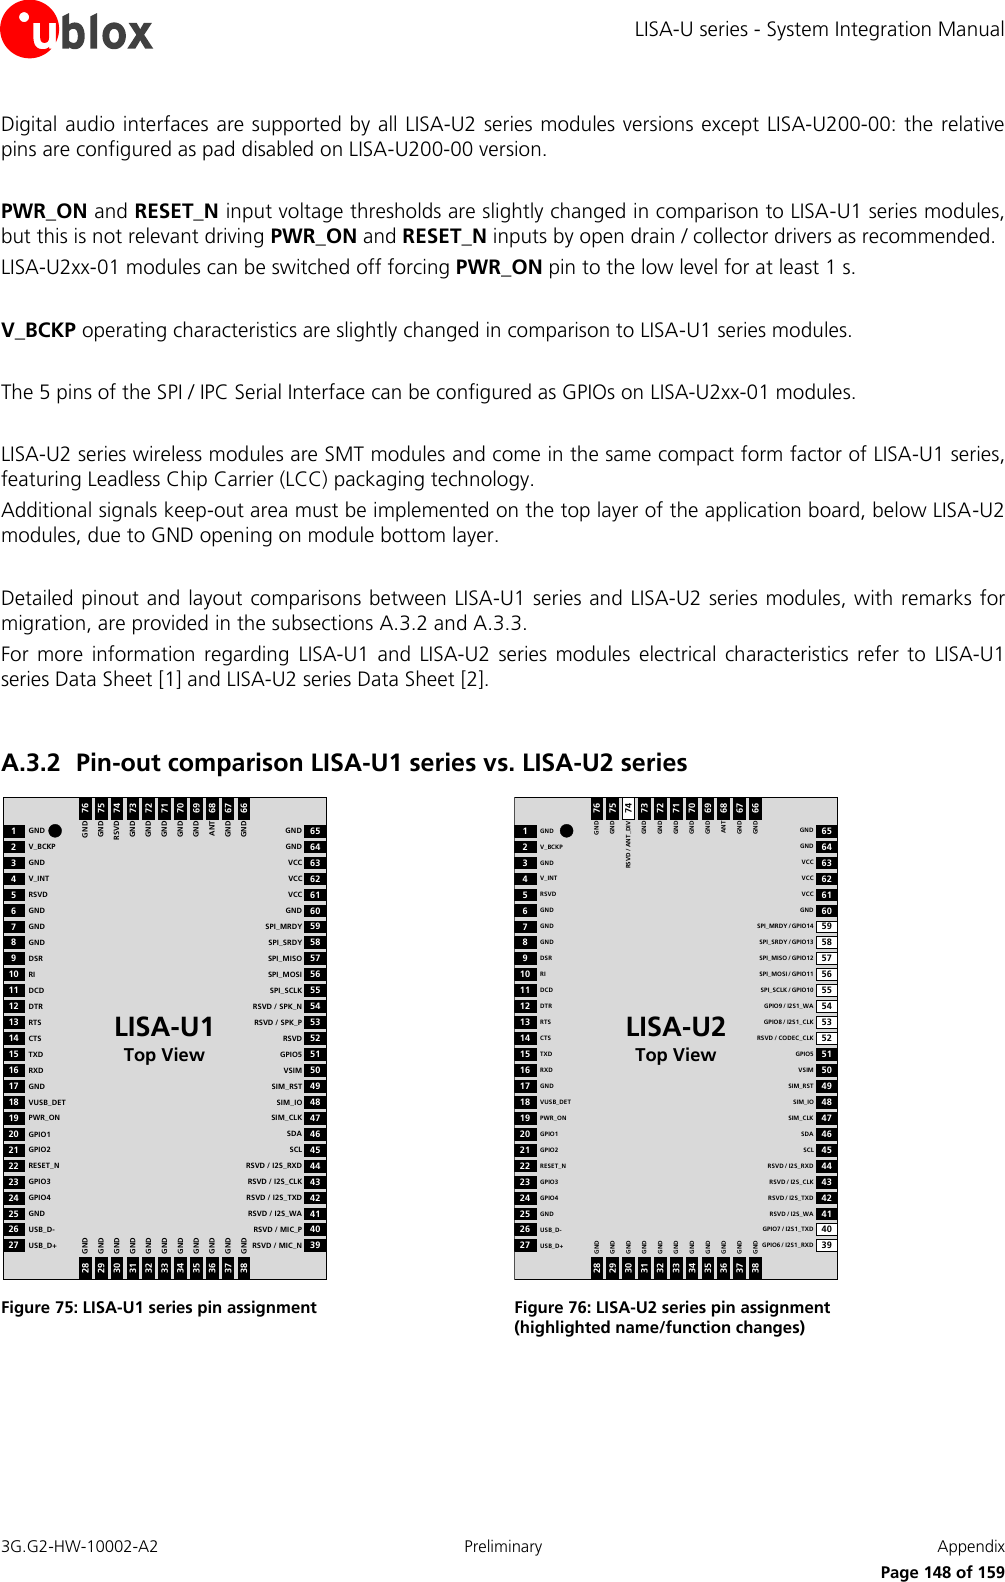 LISA-U series - System Integration Manual 3G.G2-HW-10002-A2  Preliminary  Appendix      Page 148 of 159 Digital audio interfaces are supported by all LISA-U2 series modules versions except LISA-U200-00: the relative pins are configured as pad disabled on LISA-U200-00 version.  PWR_ON and RESET_N input voltage thresholds are slightly changed in comparison to LISA-U1 series modules, but this is not relevant driving PWR_ON and RESET_N inputs by open drain / collector drivers as recommended. LISA-U2xx-01 modules can be switched off forcing PWR_ON pin to the low level for at least 1 s.  V_BCKP operating characteristics are slightly changed in comparison to LISA-U1 series modules.  The 5 pins of the SPI / IPC Serial Interface can be configured as GPIOs on LISA-U2xx-01 modules.  LISA-U2 series wireless modules are SMT modules and come in the same compact form factor of LISA-U1 series, featuring Leadless Chip Carrier (LCC) packaging technology. Additional signals keep-out area must be implemented on the top layer of the application board, below LISA-U2 modules, due to GND opening on module bottom layer.  Detailed pinout and layout comparisons between LISA-U1 series and LISA-U2 series modules, with remarks for migration, are provided in the subsections A.3.2 and A.3.3. For  more information  regarding  LISA-U1  and  LISA-U2 series  modules  electrical  characteristics  refer  to  LISA-U1 series Data Sheet [1] and LISA-U2 series Data Sheet [2].  A.3.2 Pin-out comparison LISA-U1 series vs. LISA-U2 series 65646362616059585756555453525150494847464544434241GNDVCCVCCVCCGNDSPI_MRDYSPI_SRDYSPI_MISOSPI_MOSISPI_SCLKRSVD / SPK_NGNDRSVD / SPK_PRSVDGPIO5VSIMSIM_RSTSIM_IOSIM_CLKSDASCLRSVD / I2S_RXDRSVD / I2S_CLKRSVD / I2S_TXDRSVD / I2S_WA12345678910111213141516171819202122232425V_BCKPGNDV_INTRSVDGNDGNDGNDDSRRIDCDDTRGNDRTSCTSTXDRXDGNDVUSB_DETPWR_ONGPIO1GPIO2RESET_NGPIO3GPIO4GND2627USB_D-USB_D+4039RSVD / MIC_PRSVD / MIC_N2829303132333435363738GNDGNDGNDGNDGNDGNDGNDGNDGNDGNDGND 7675747372717069686766GNDRSVDGNDGNDGNDGNDGNDANTGNDGNDGNDLISA-U1Top View Figure 75: LISA-U1 series pin assignment 65646362616059585756555453525150494847464544434241GNDVCCVCCVCCGNDSPI_MRDY / GPIO14SPI_SRDY / GPIO13SPI_MISO / GPIO12SPI_MOSI / GPIO11SPI_SCLK / GPIO10GPIO9 / I2S1_WAGNDGPIO8 / I2S1_CLKRSVD / CODEC_CLKGPIO5VSIMSIM_RSTSIM_IOSIM_CLKSDASCLRSVD / I2S_RXDRSVD / I2S_CLKRSVD / I2S_TXDRSVD / I2S_WA12345678910111213141516171819202122232425V_BCKPGNDV_INTRSVDGNDGNDGNDDSRRIDCDDTRGNDRTSCTSTXDRXDGNDVUSB_DETPWR_ONGPIO1GPIO2RESET_NGPIO3GPIO4GND2627USB_D-USB_D+4039GPIO7 / I2S1_TXDGPIO6 / I2S1_RXD2829303132333435363738GNDGNDGNDGNDGNDGNDGNDGNDGNDGNDGND 7675747372717069686766GNDRSVD / ANT_DIVGNDGNDGNDGNDGNDANTGNDGNDGNDLISA-U2Top View Figure 76: LISA-U2 series pin assignment  (highlighted name/function changes)  